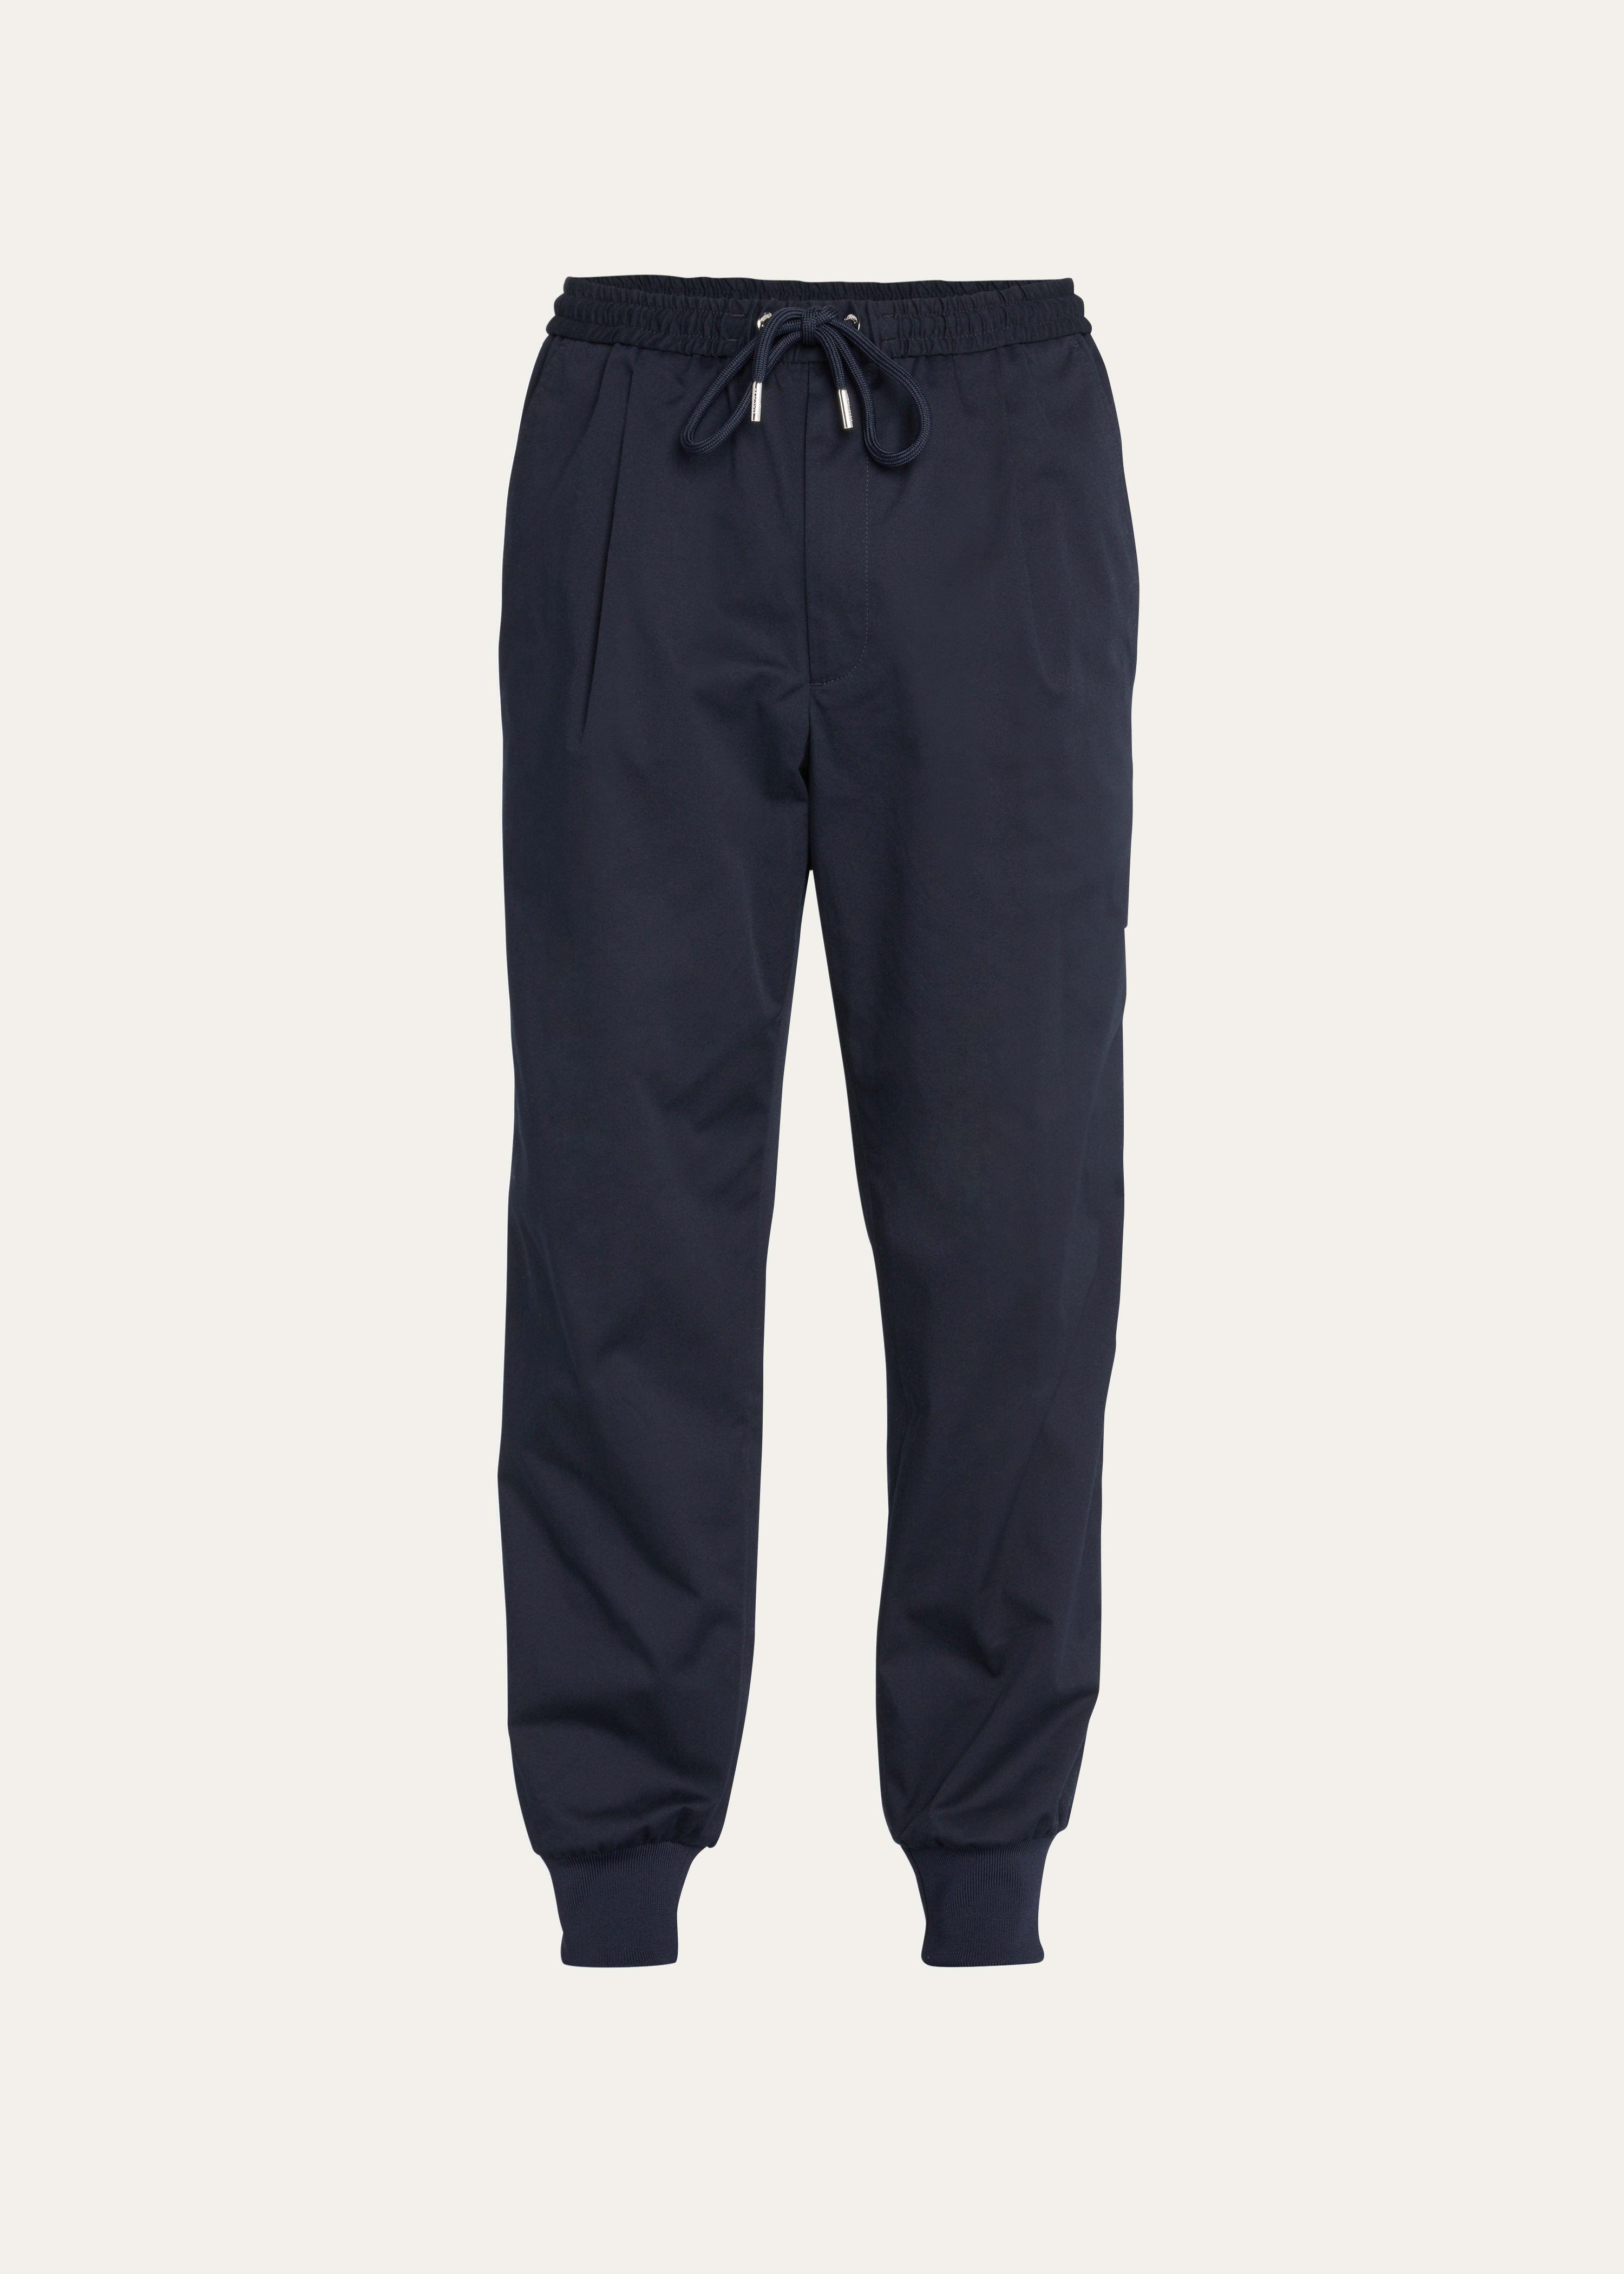 MONCLER MEN'S PLEATED SIDE-TAPE CHINO JOGGER PANTS